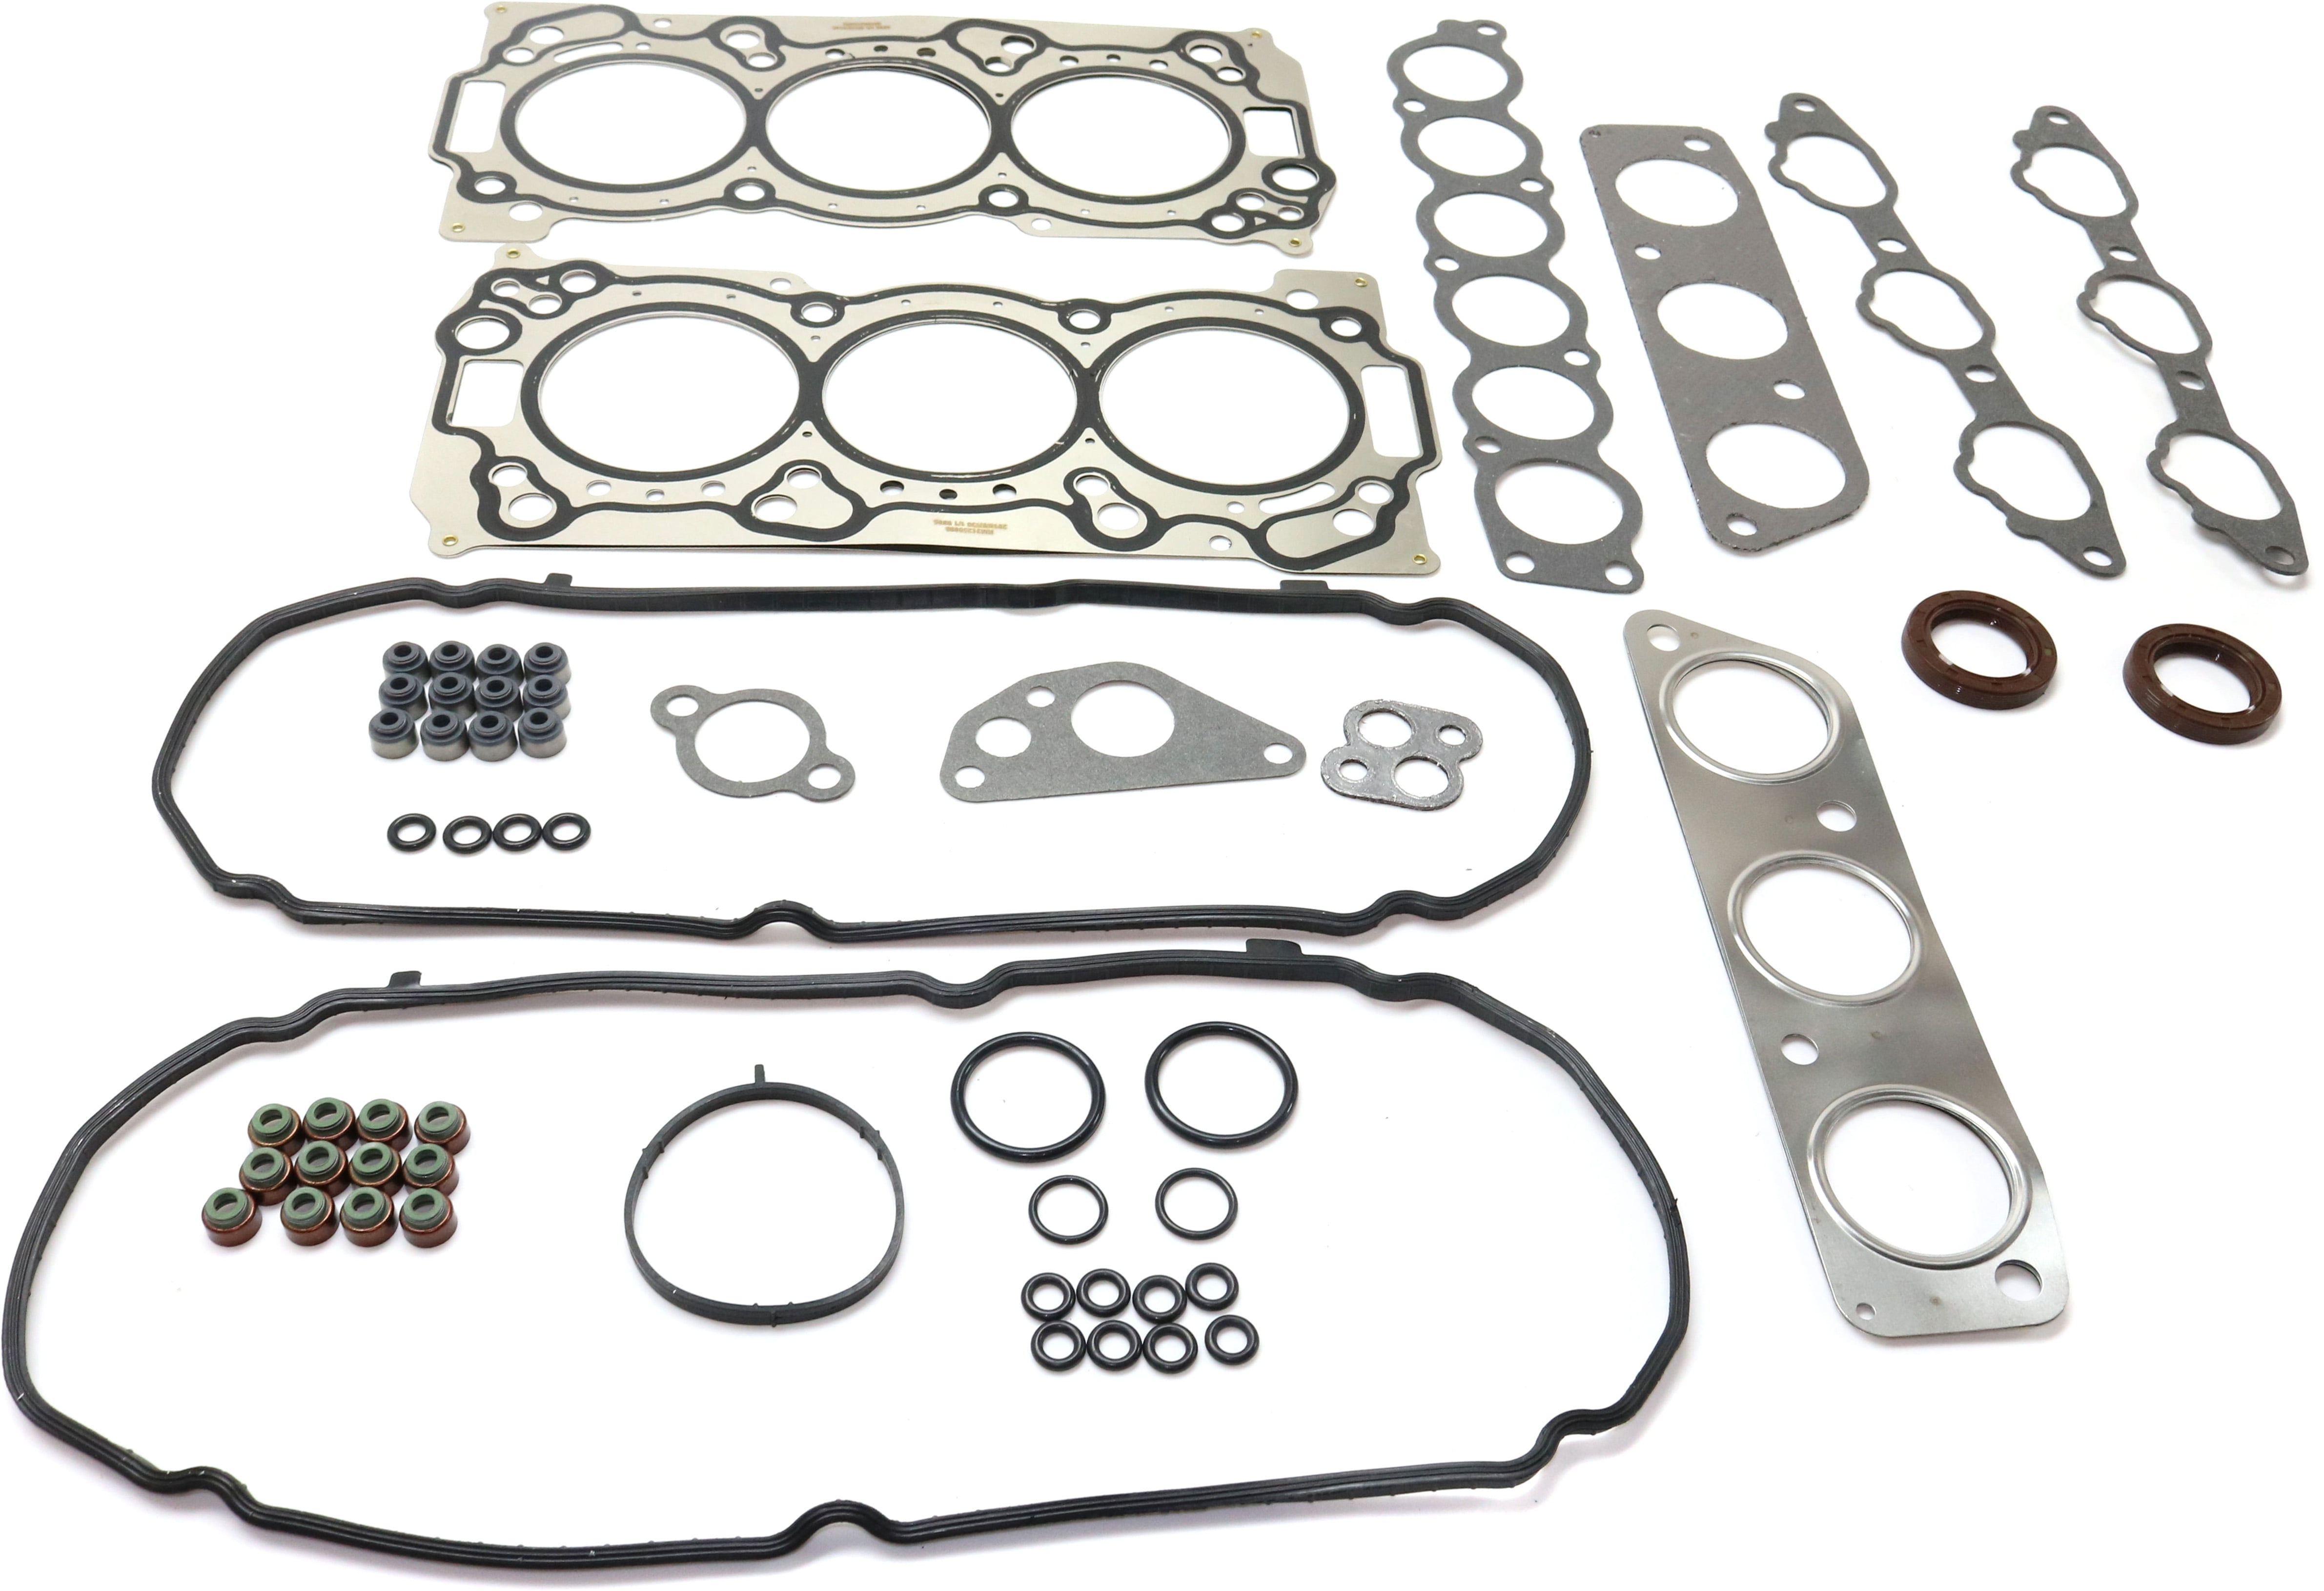 Head Gasket Set Compatible with 2007-2009 Mitsubishi Outlander 6Cyl 3.0L 